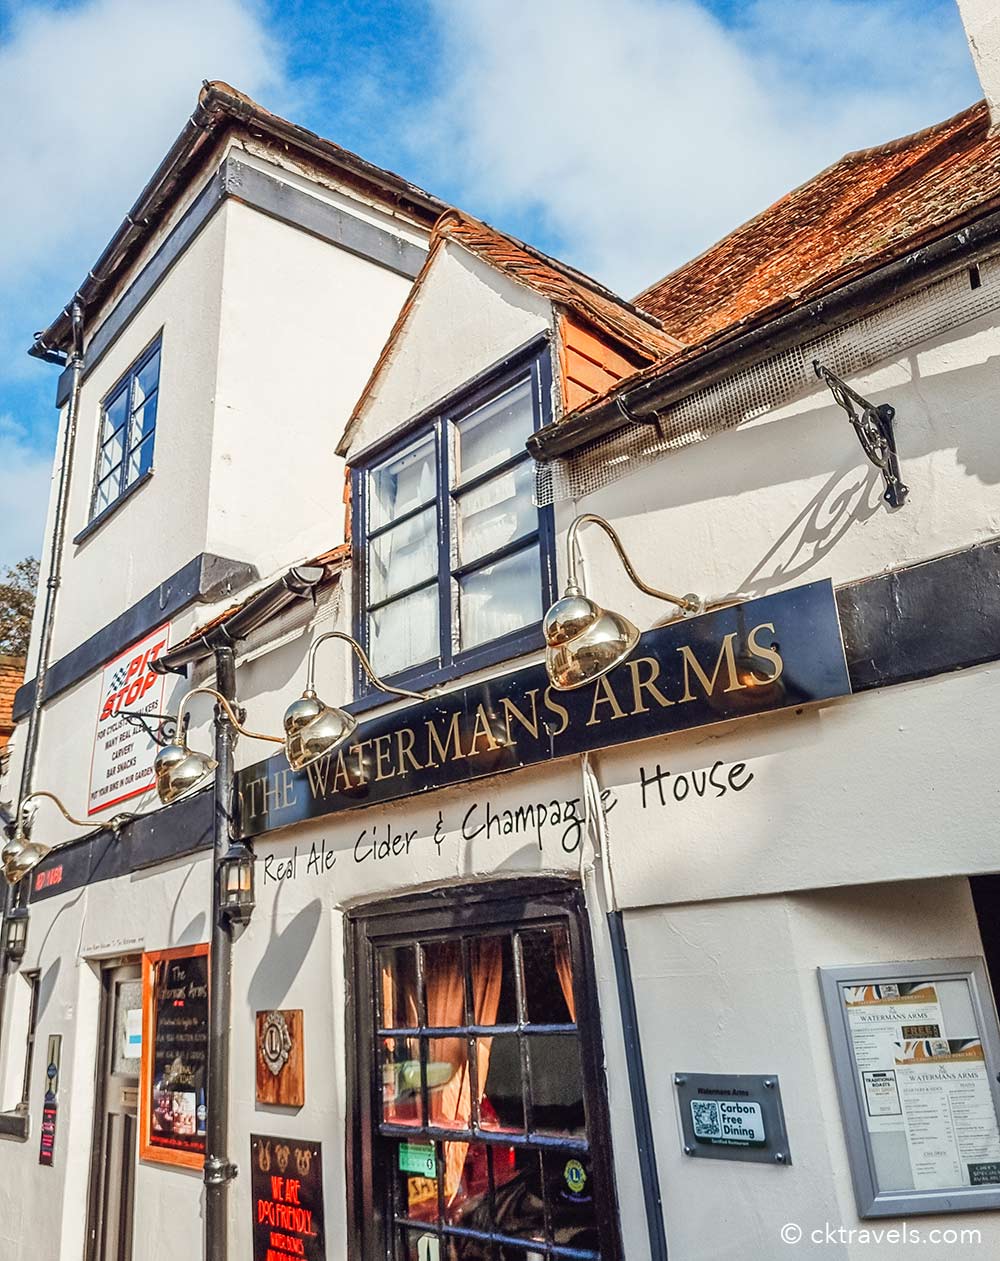 The Watermans Arms pub, Eton and Windsor. Copyright cktravels.com